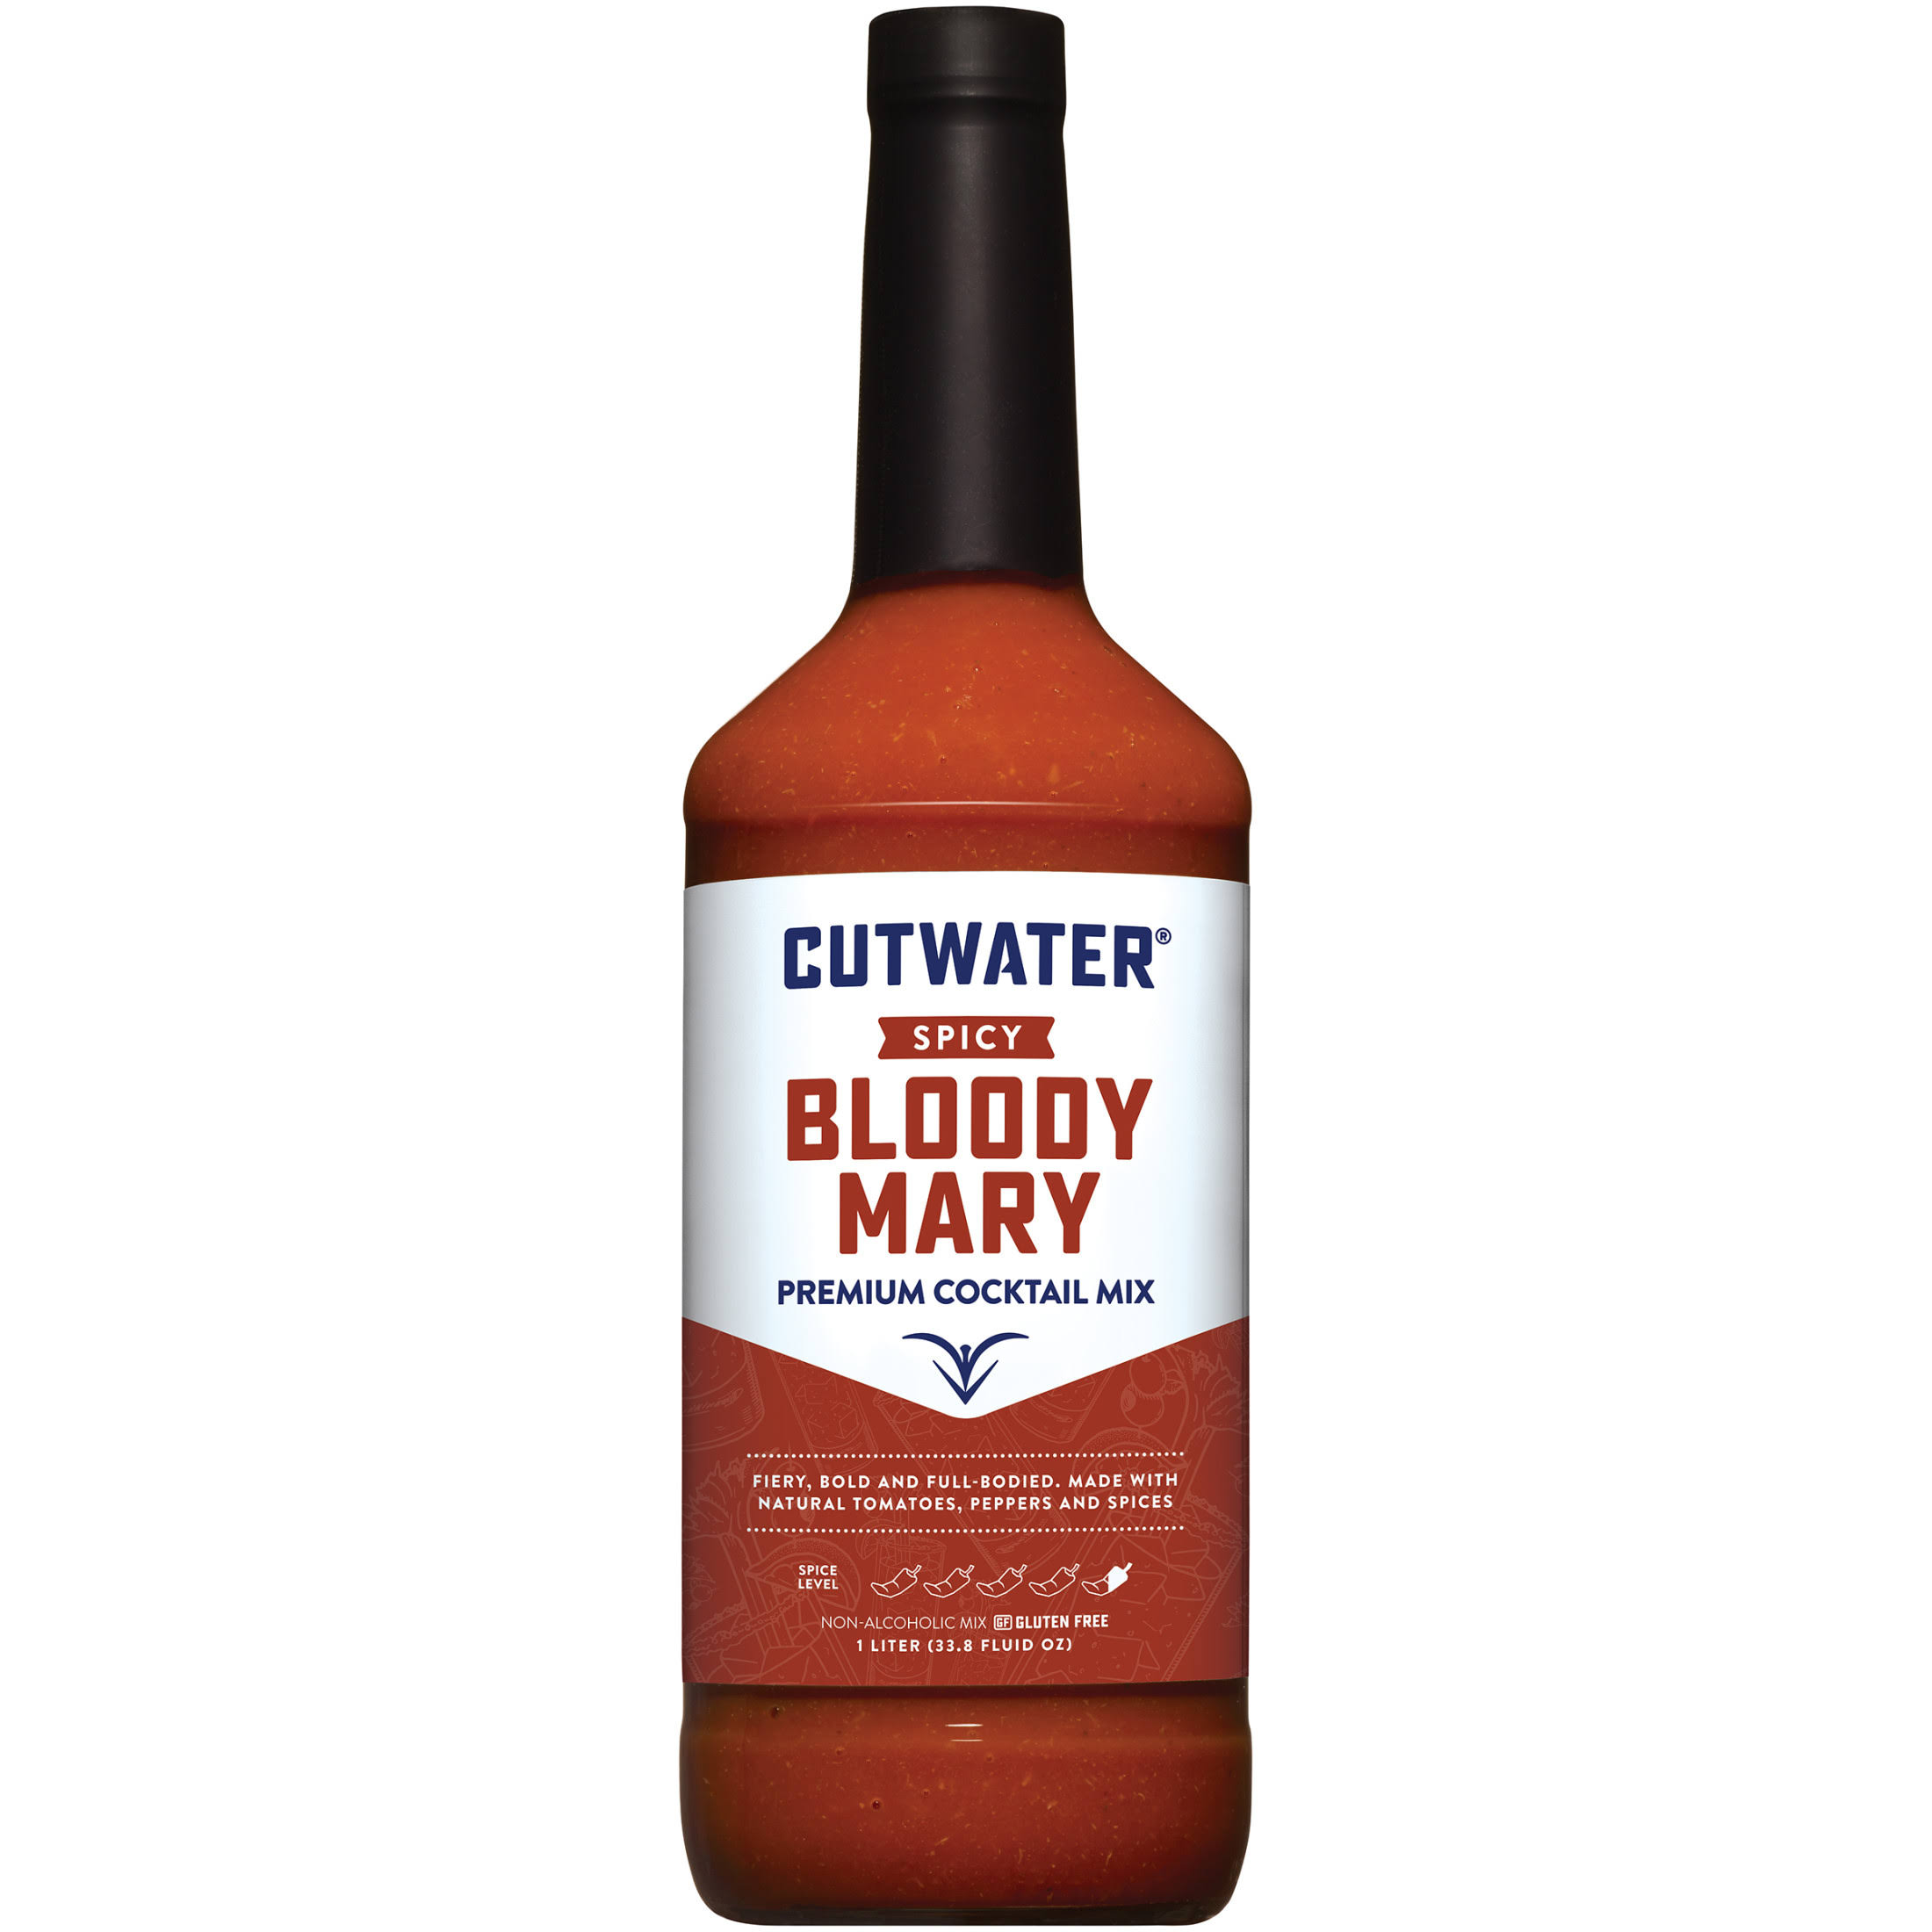 Cutwater Spicy Bloody Mary Cocktail Mix (1L)